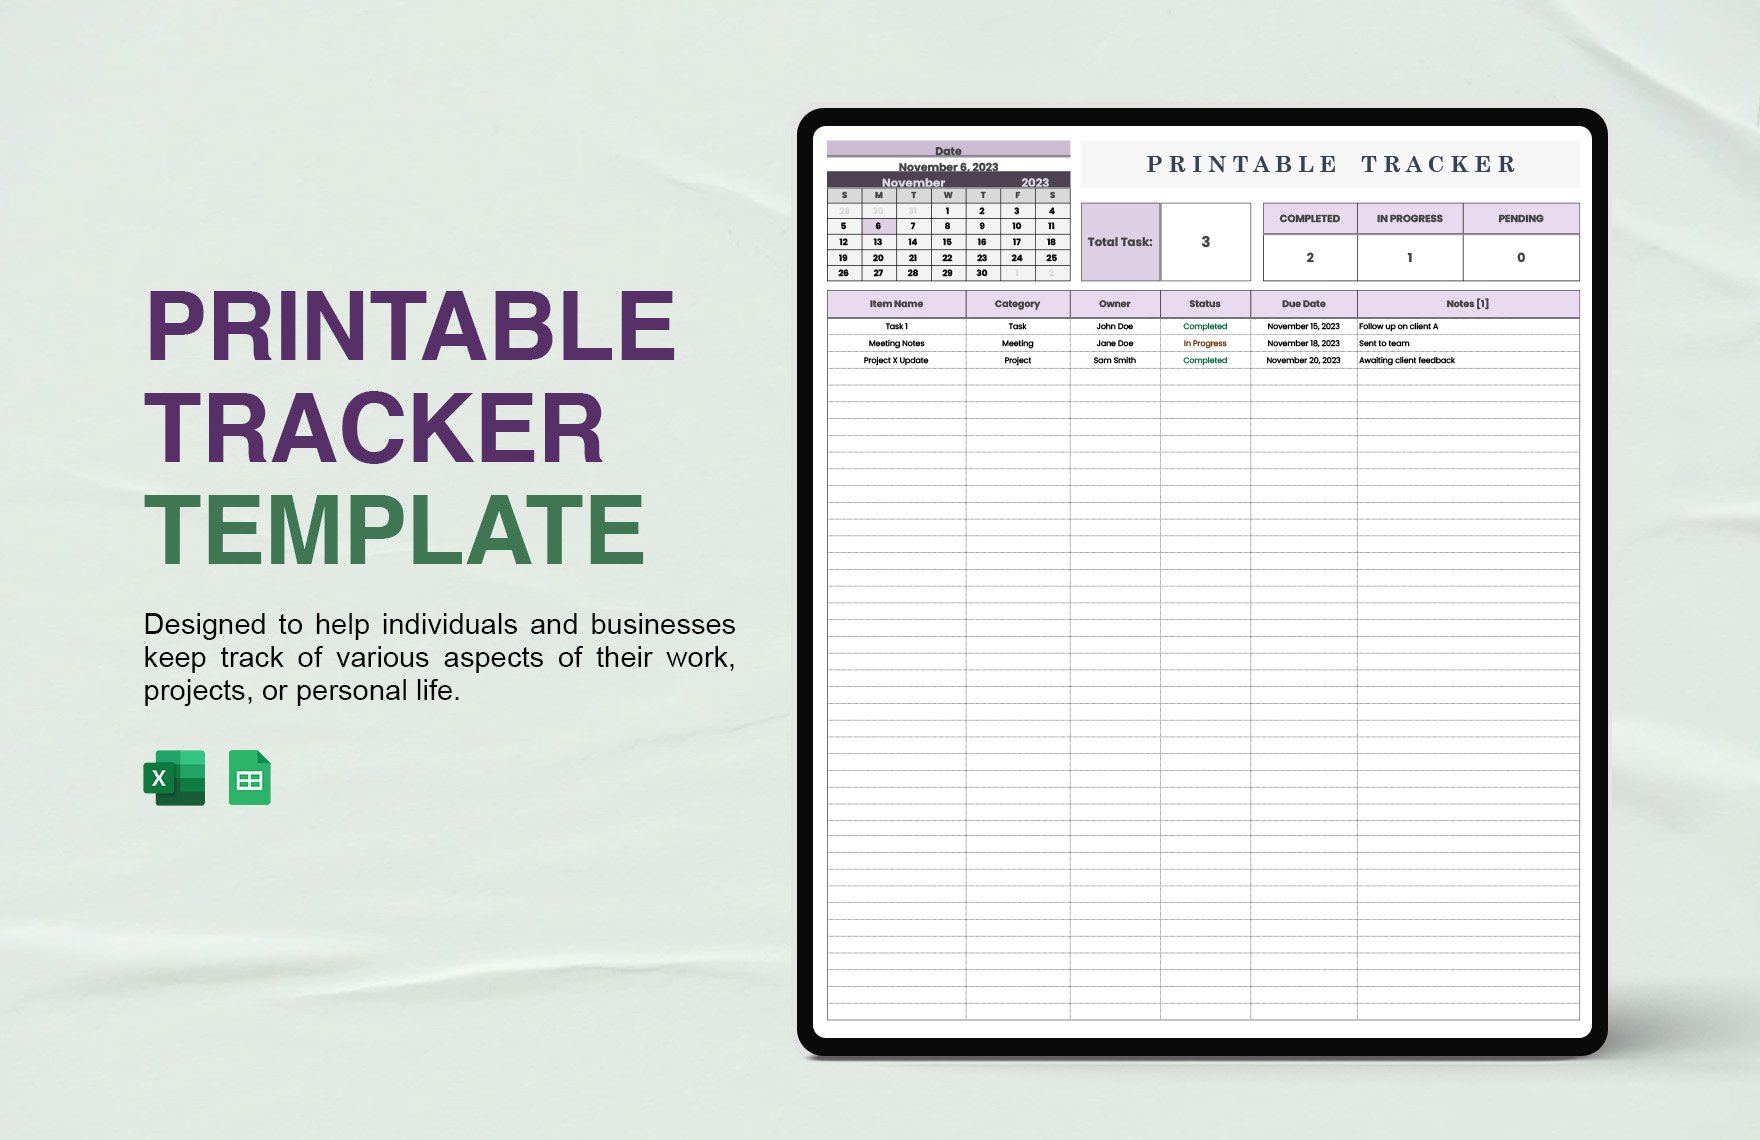 Free Printable Tracker Template in Excel, Google Sheets